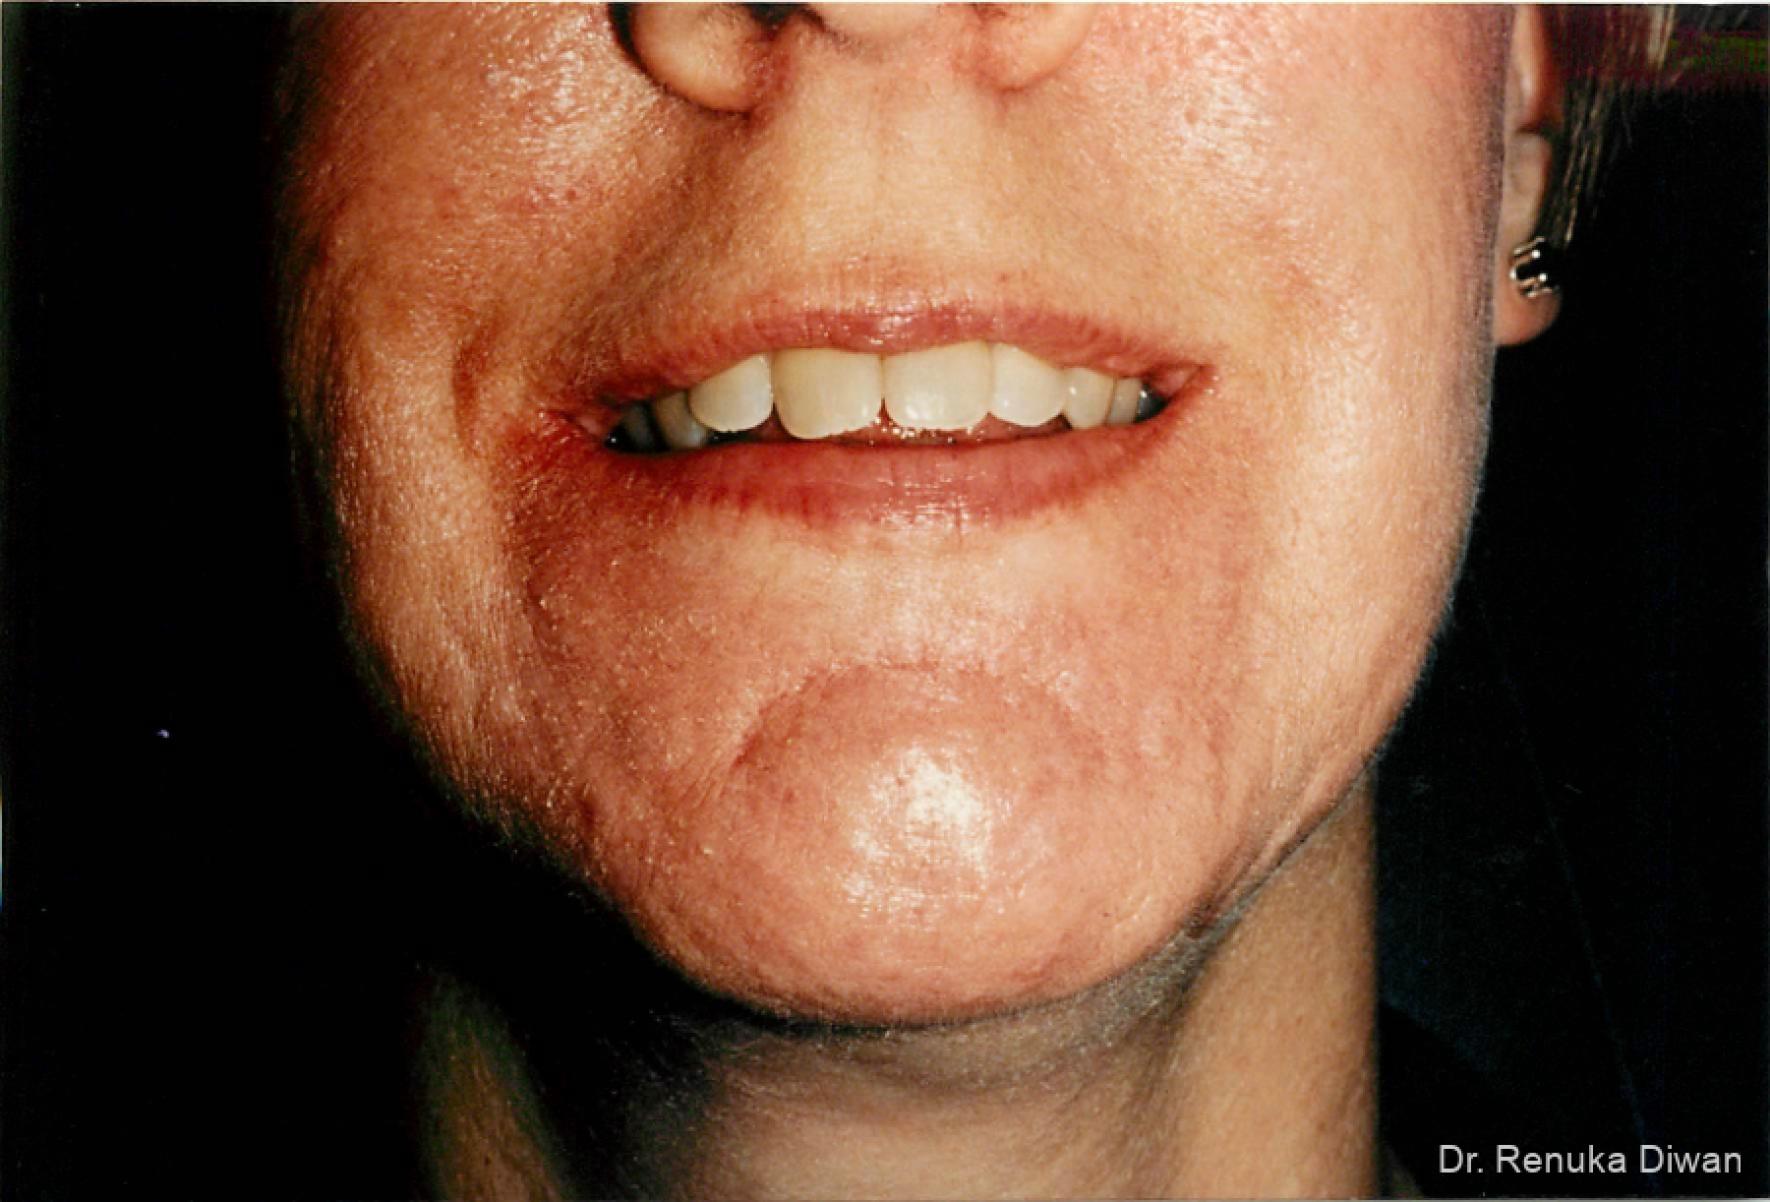 Acne Scars: Patient 2 - After  